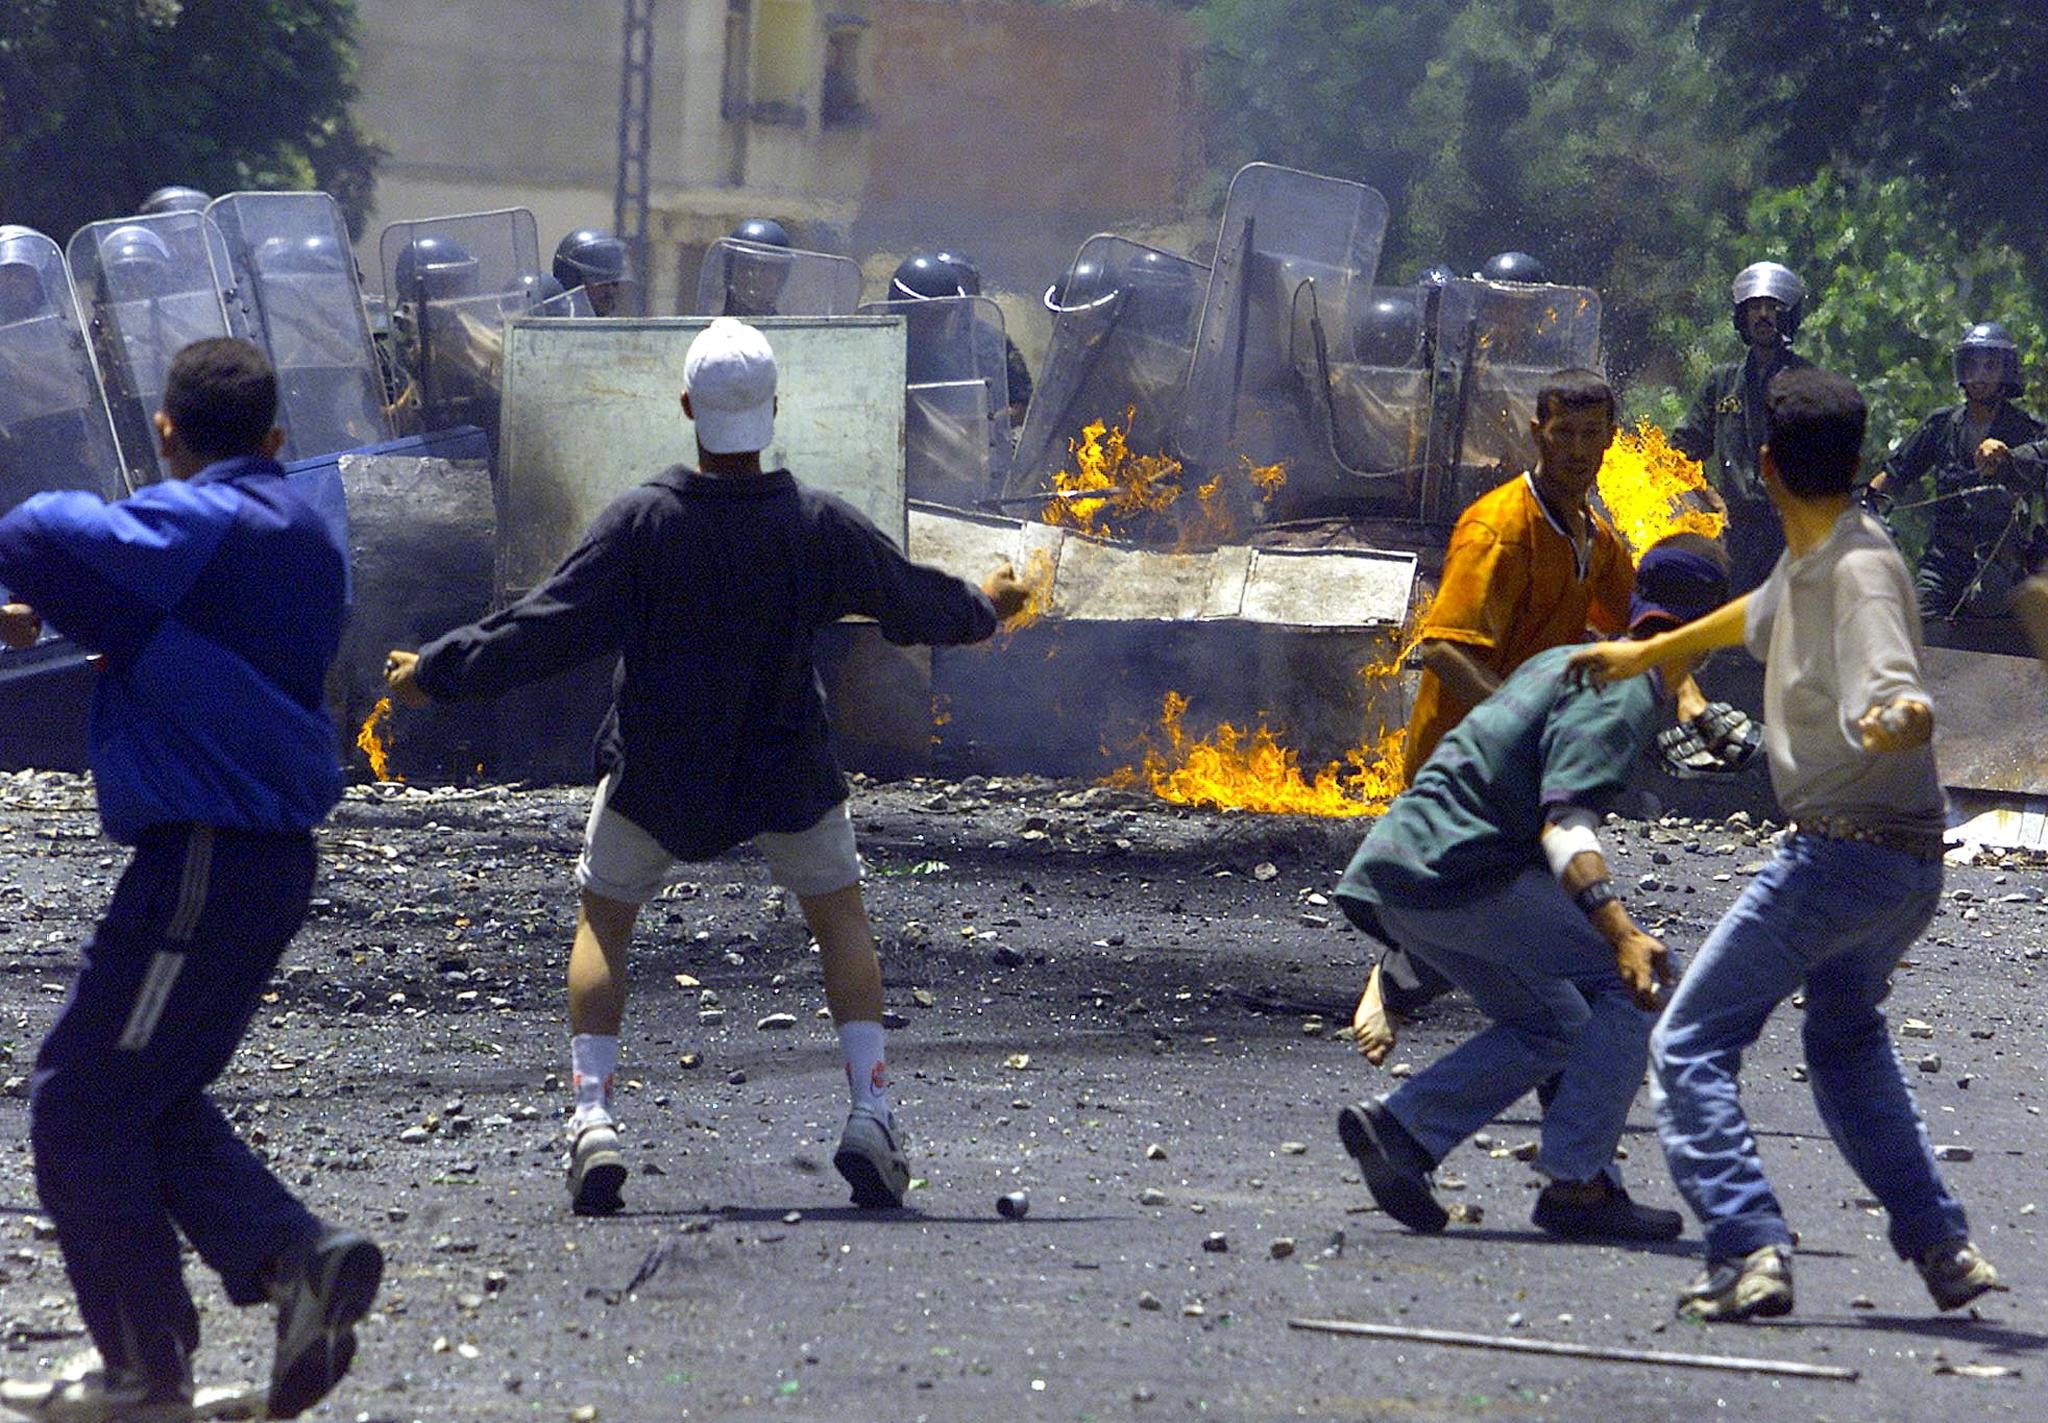 Violently repressed protests against corruption and poverty in Algeria's majority-Berber Kabylie region in 2001 became known as the "Black spring" (AFP)